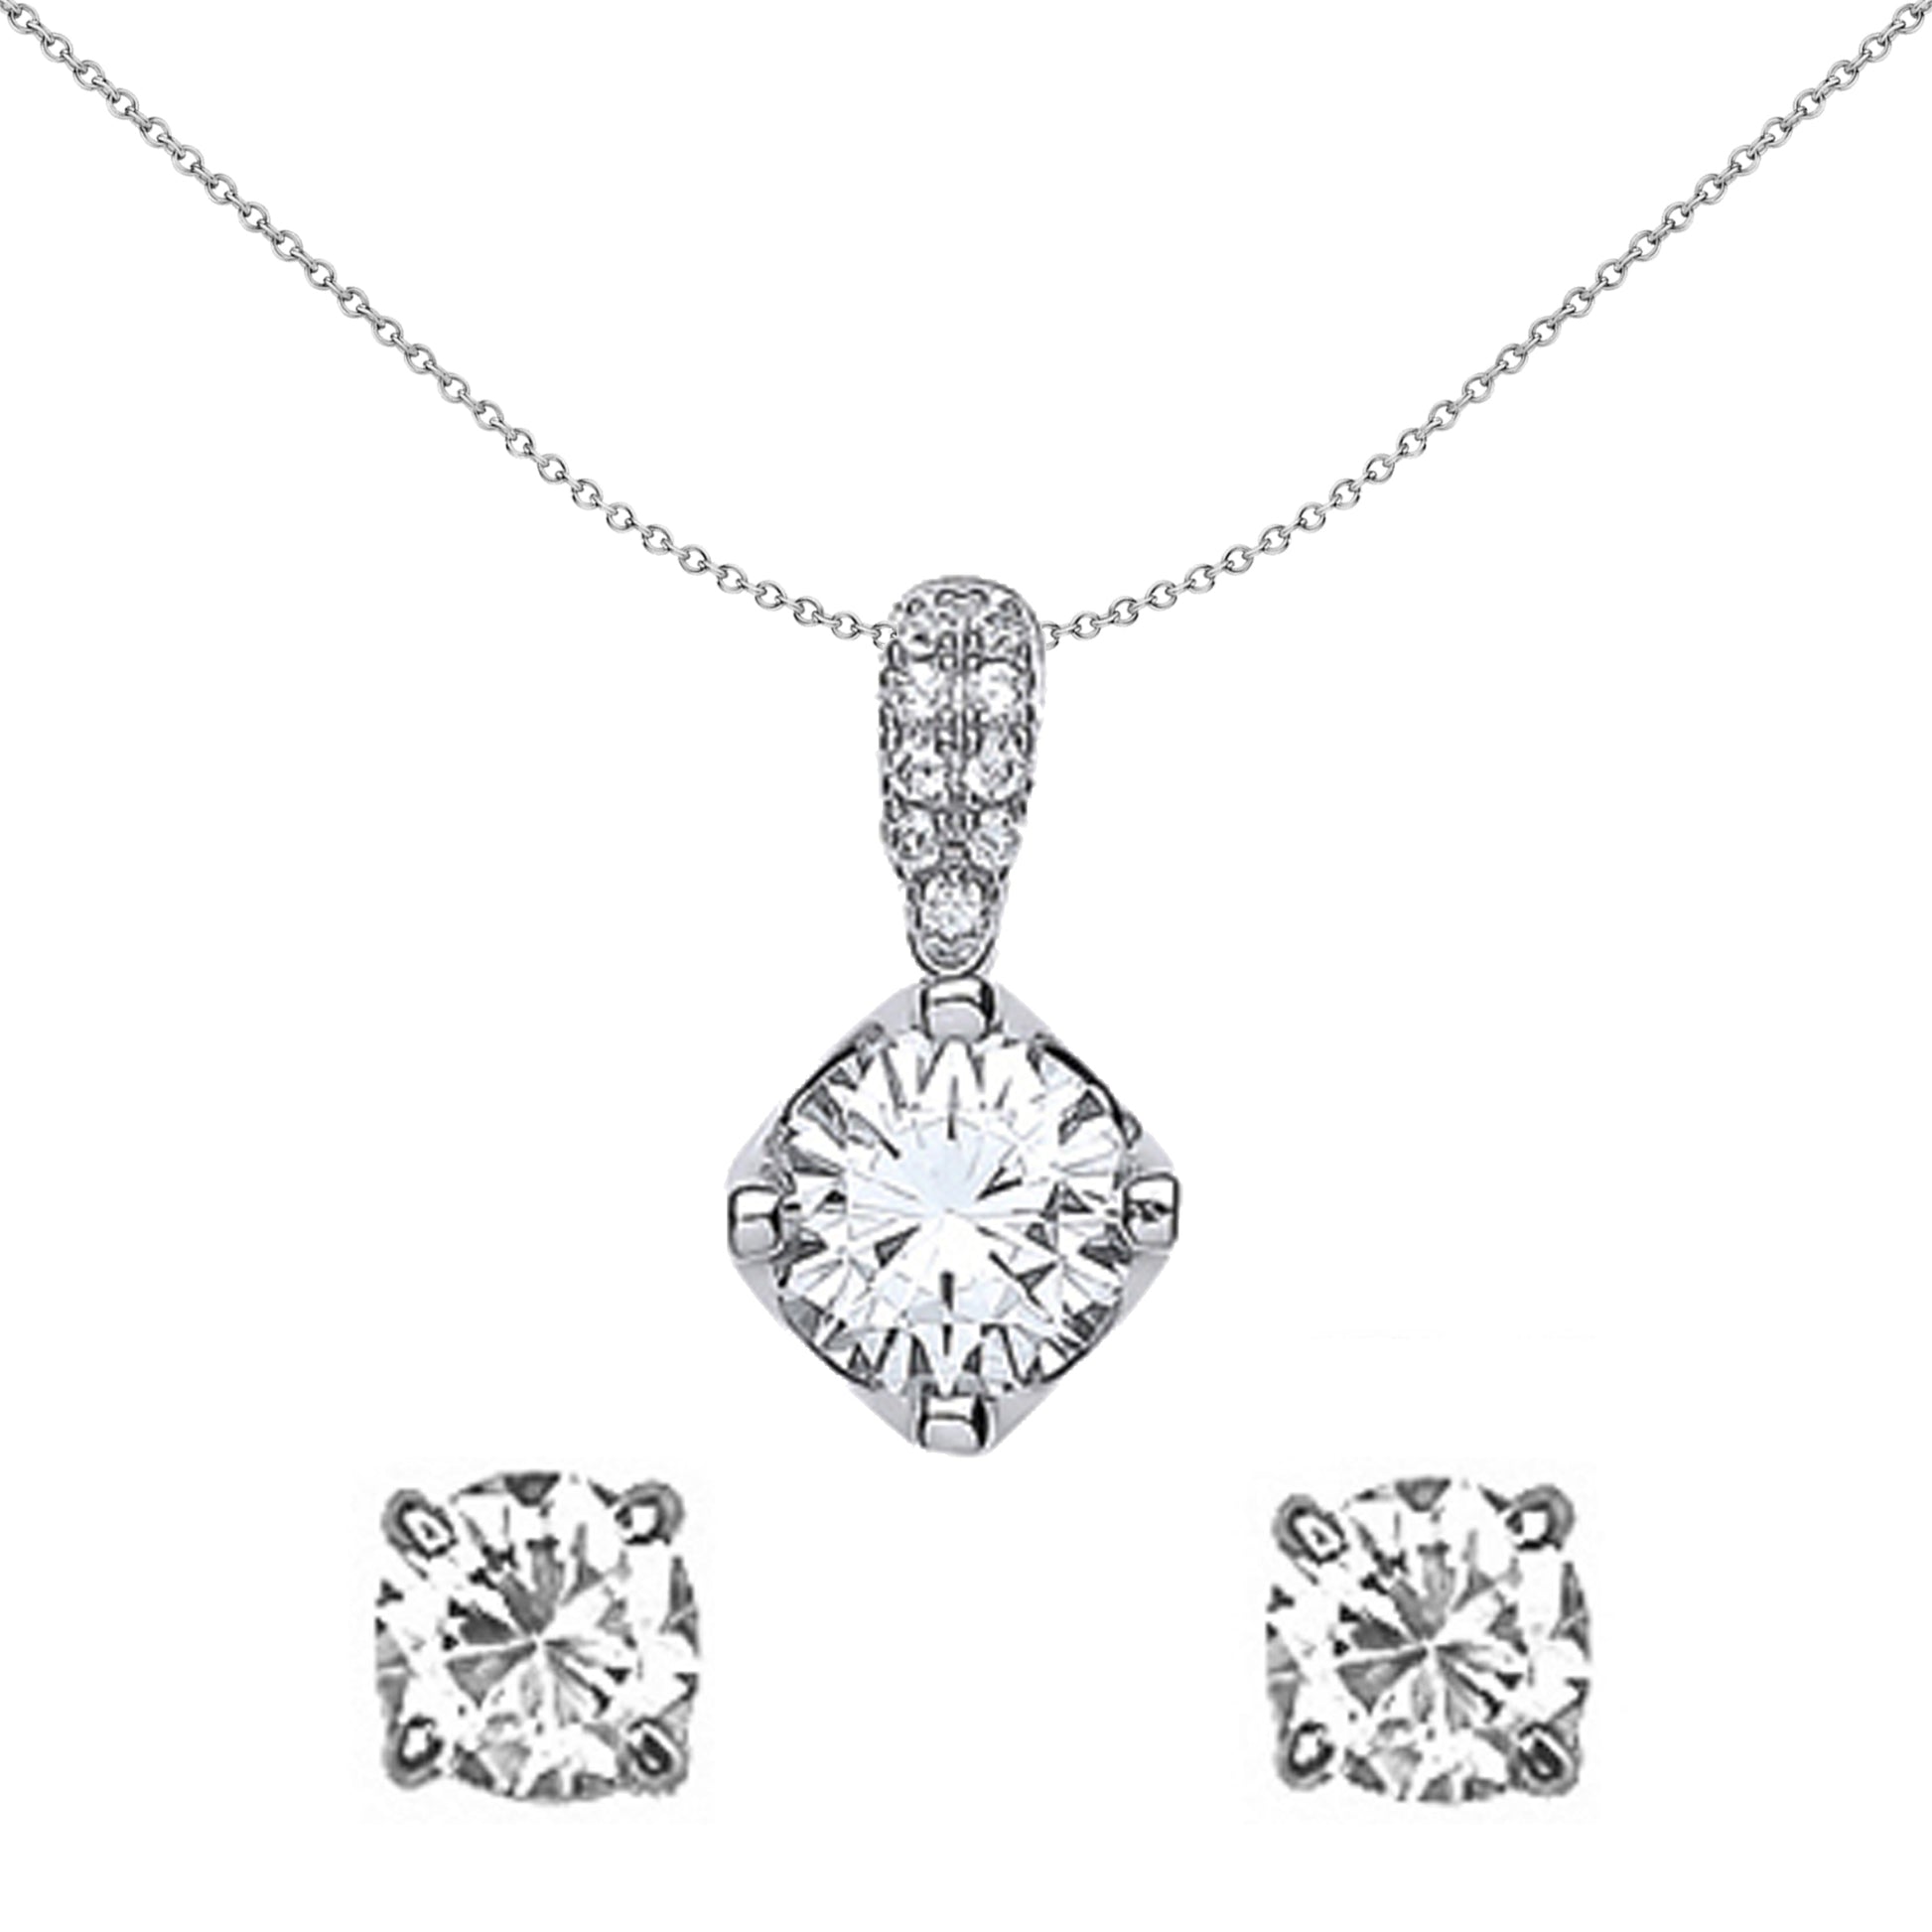 Silver  CZ Framed Solitaire Earrings Necklace Set - GSET603